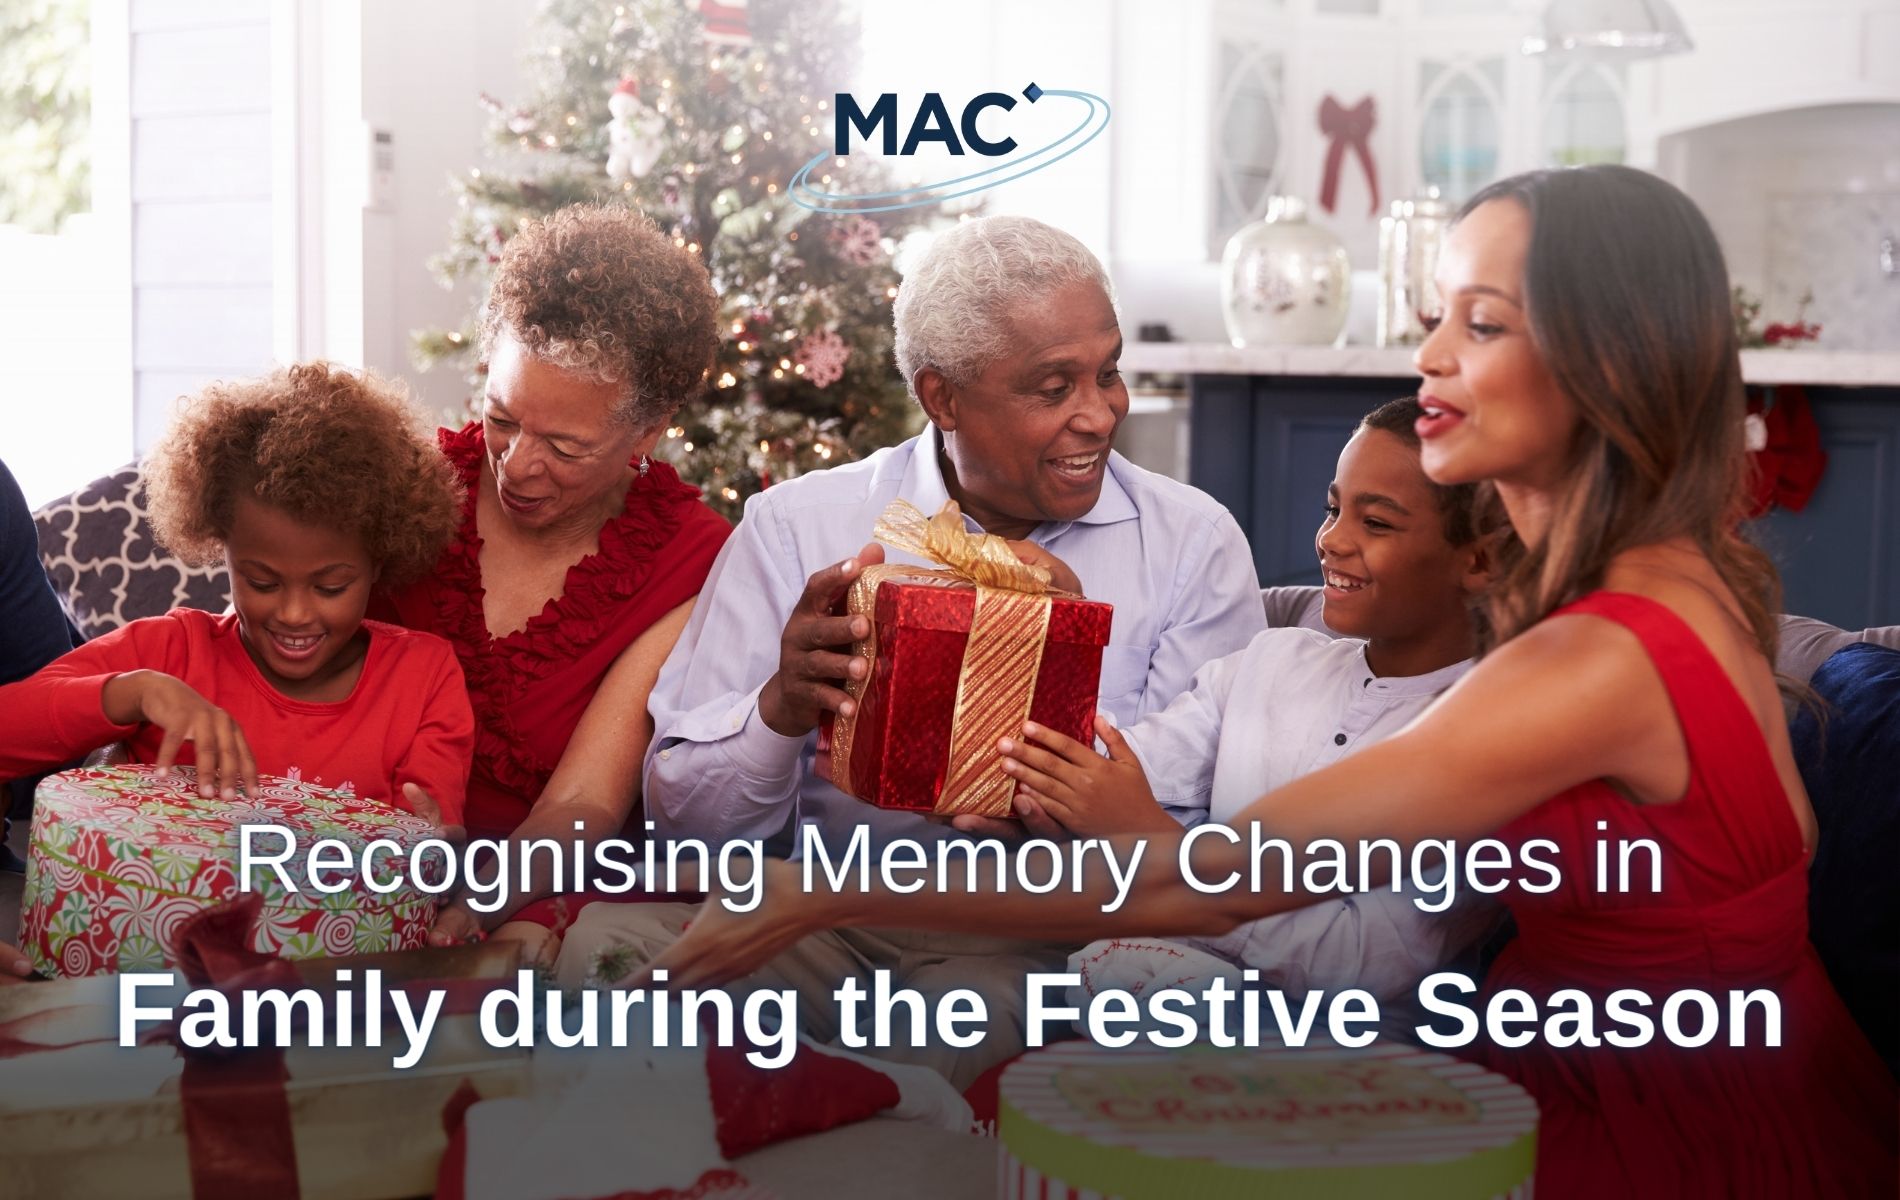 MARC - Memory Changes in Family Members during the Festive Season